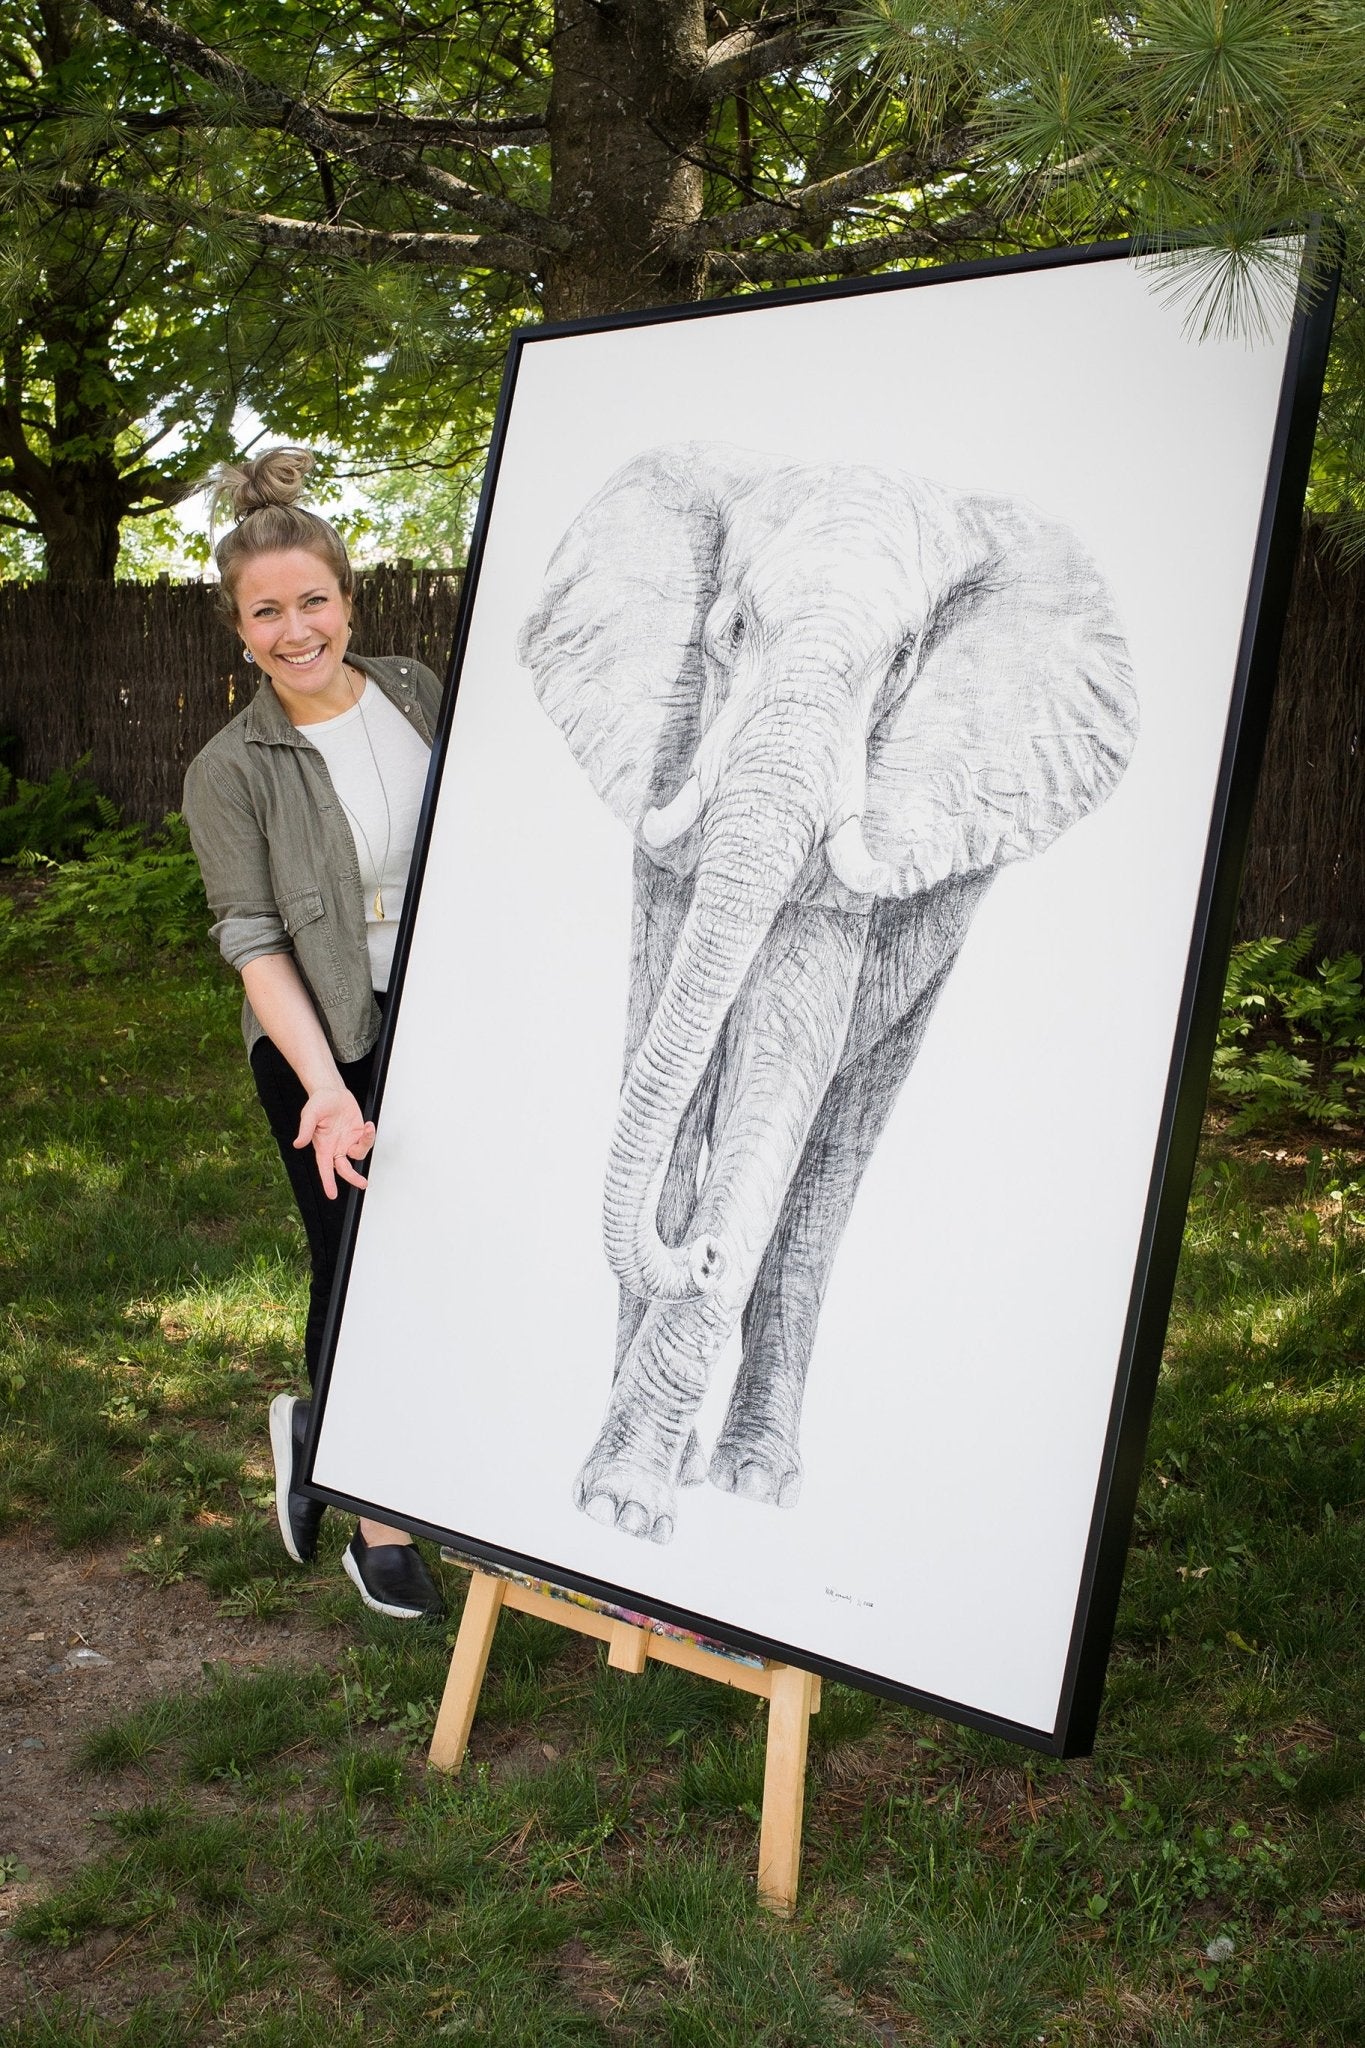 ORIGINAL ARTWORK - Elephant - From the Zoo de Granby Collaboration - LE NID atelier